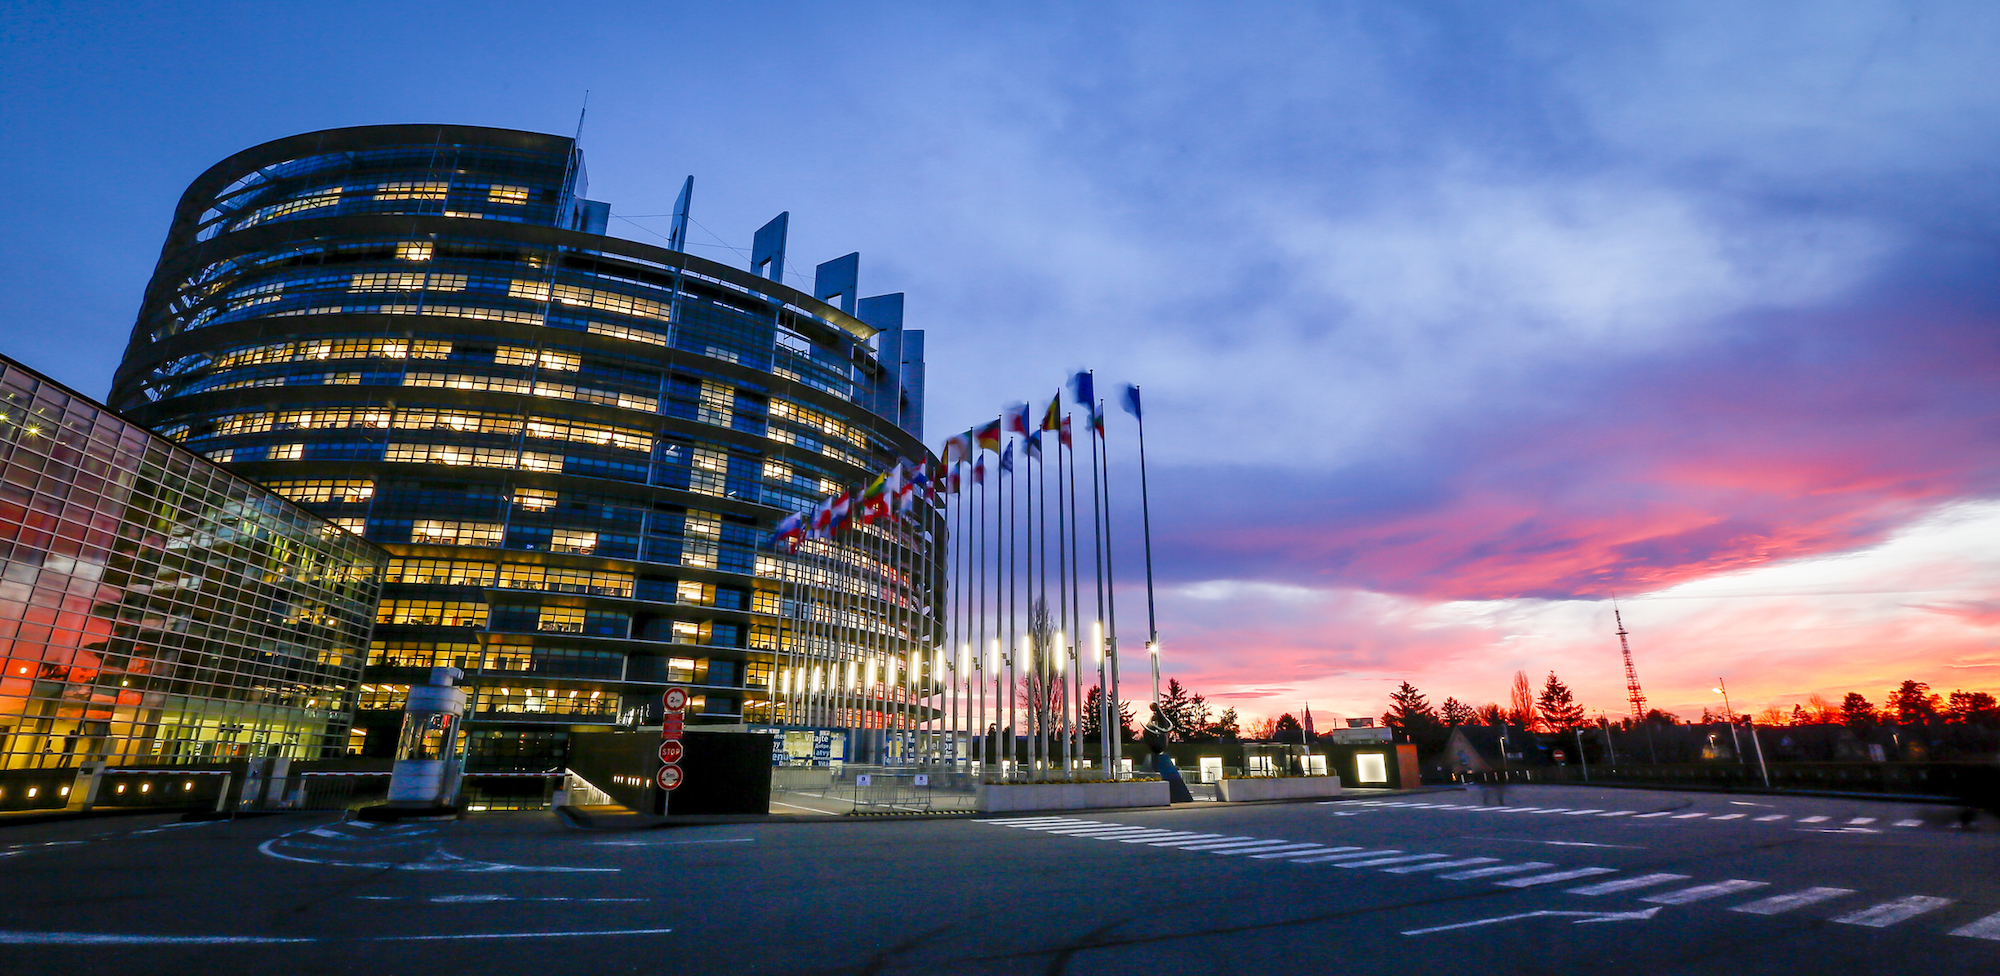 The LOW building of the European Parliament in Strasbourg at sunset